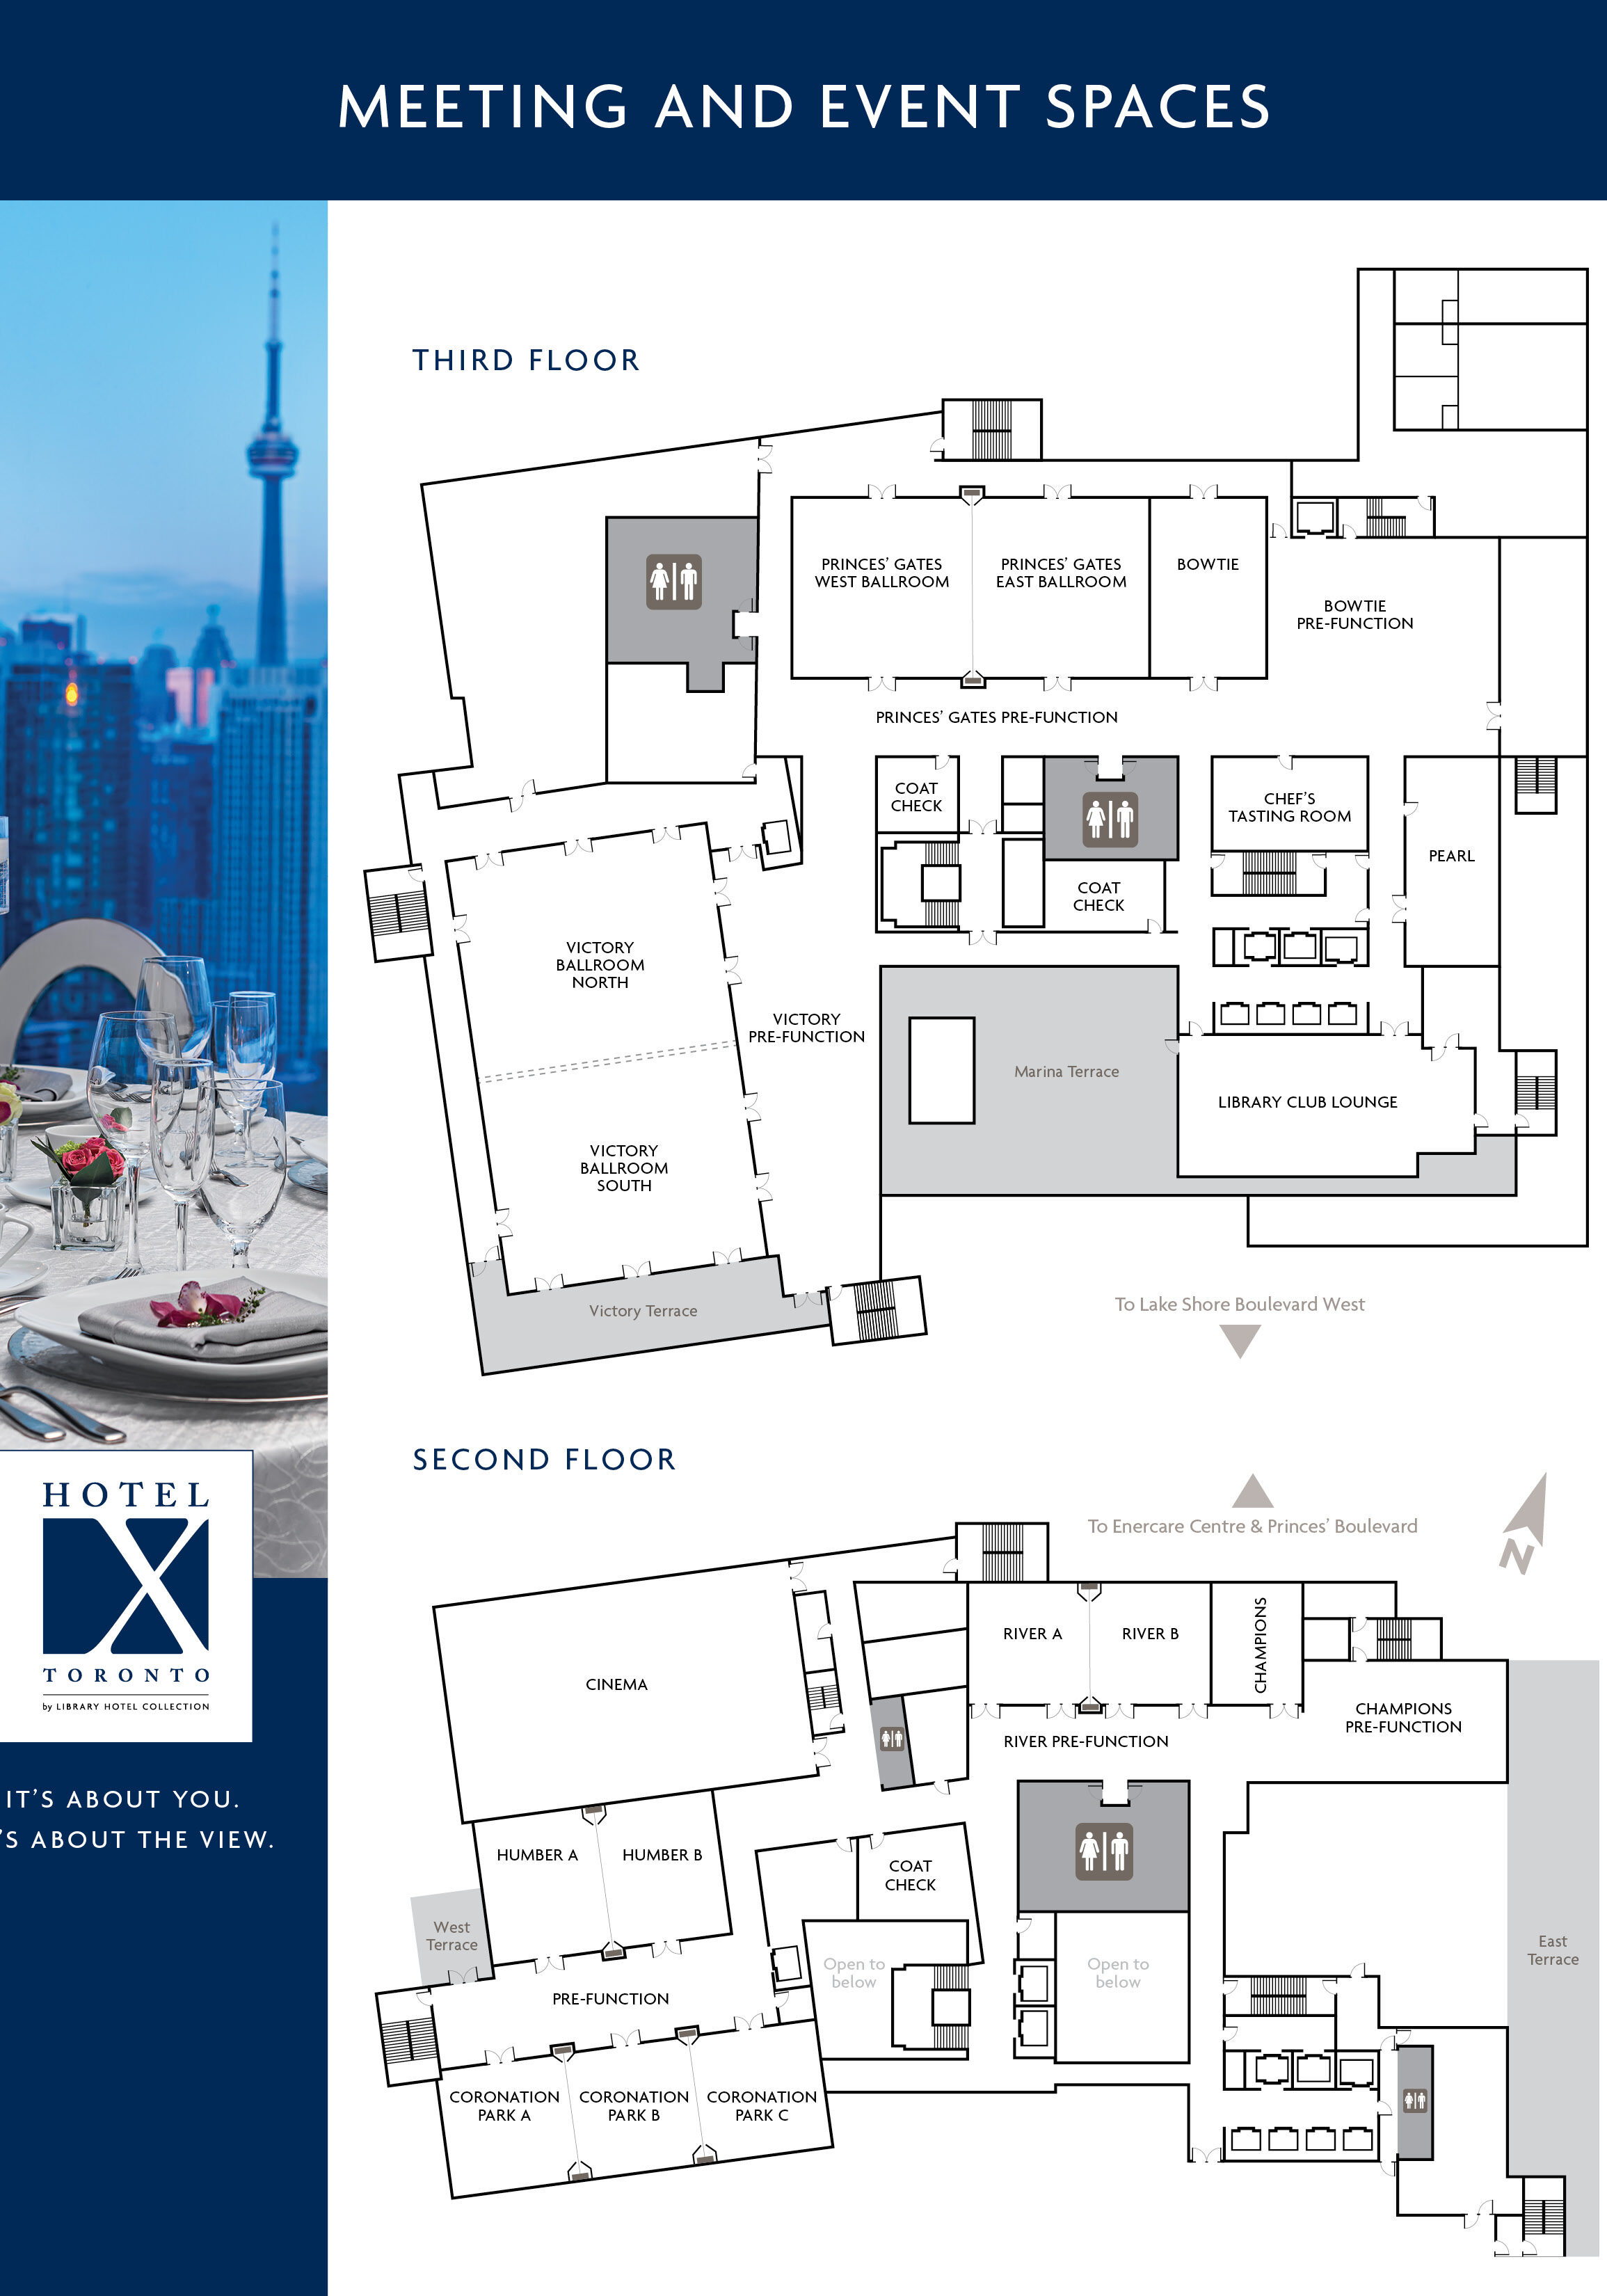 Hotel X Toronto Infographic Map of Meeting and Event Spaces